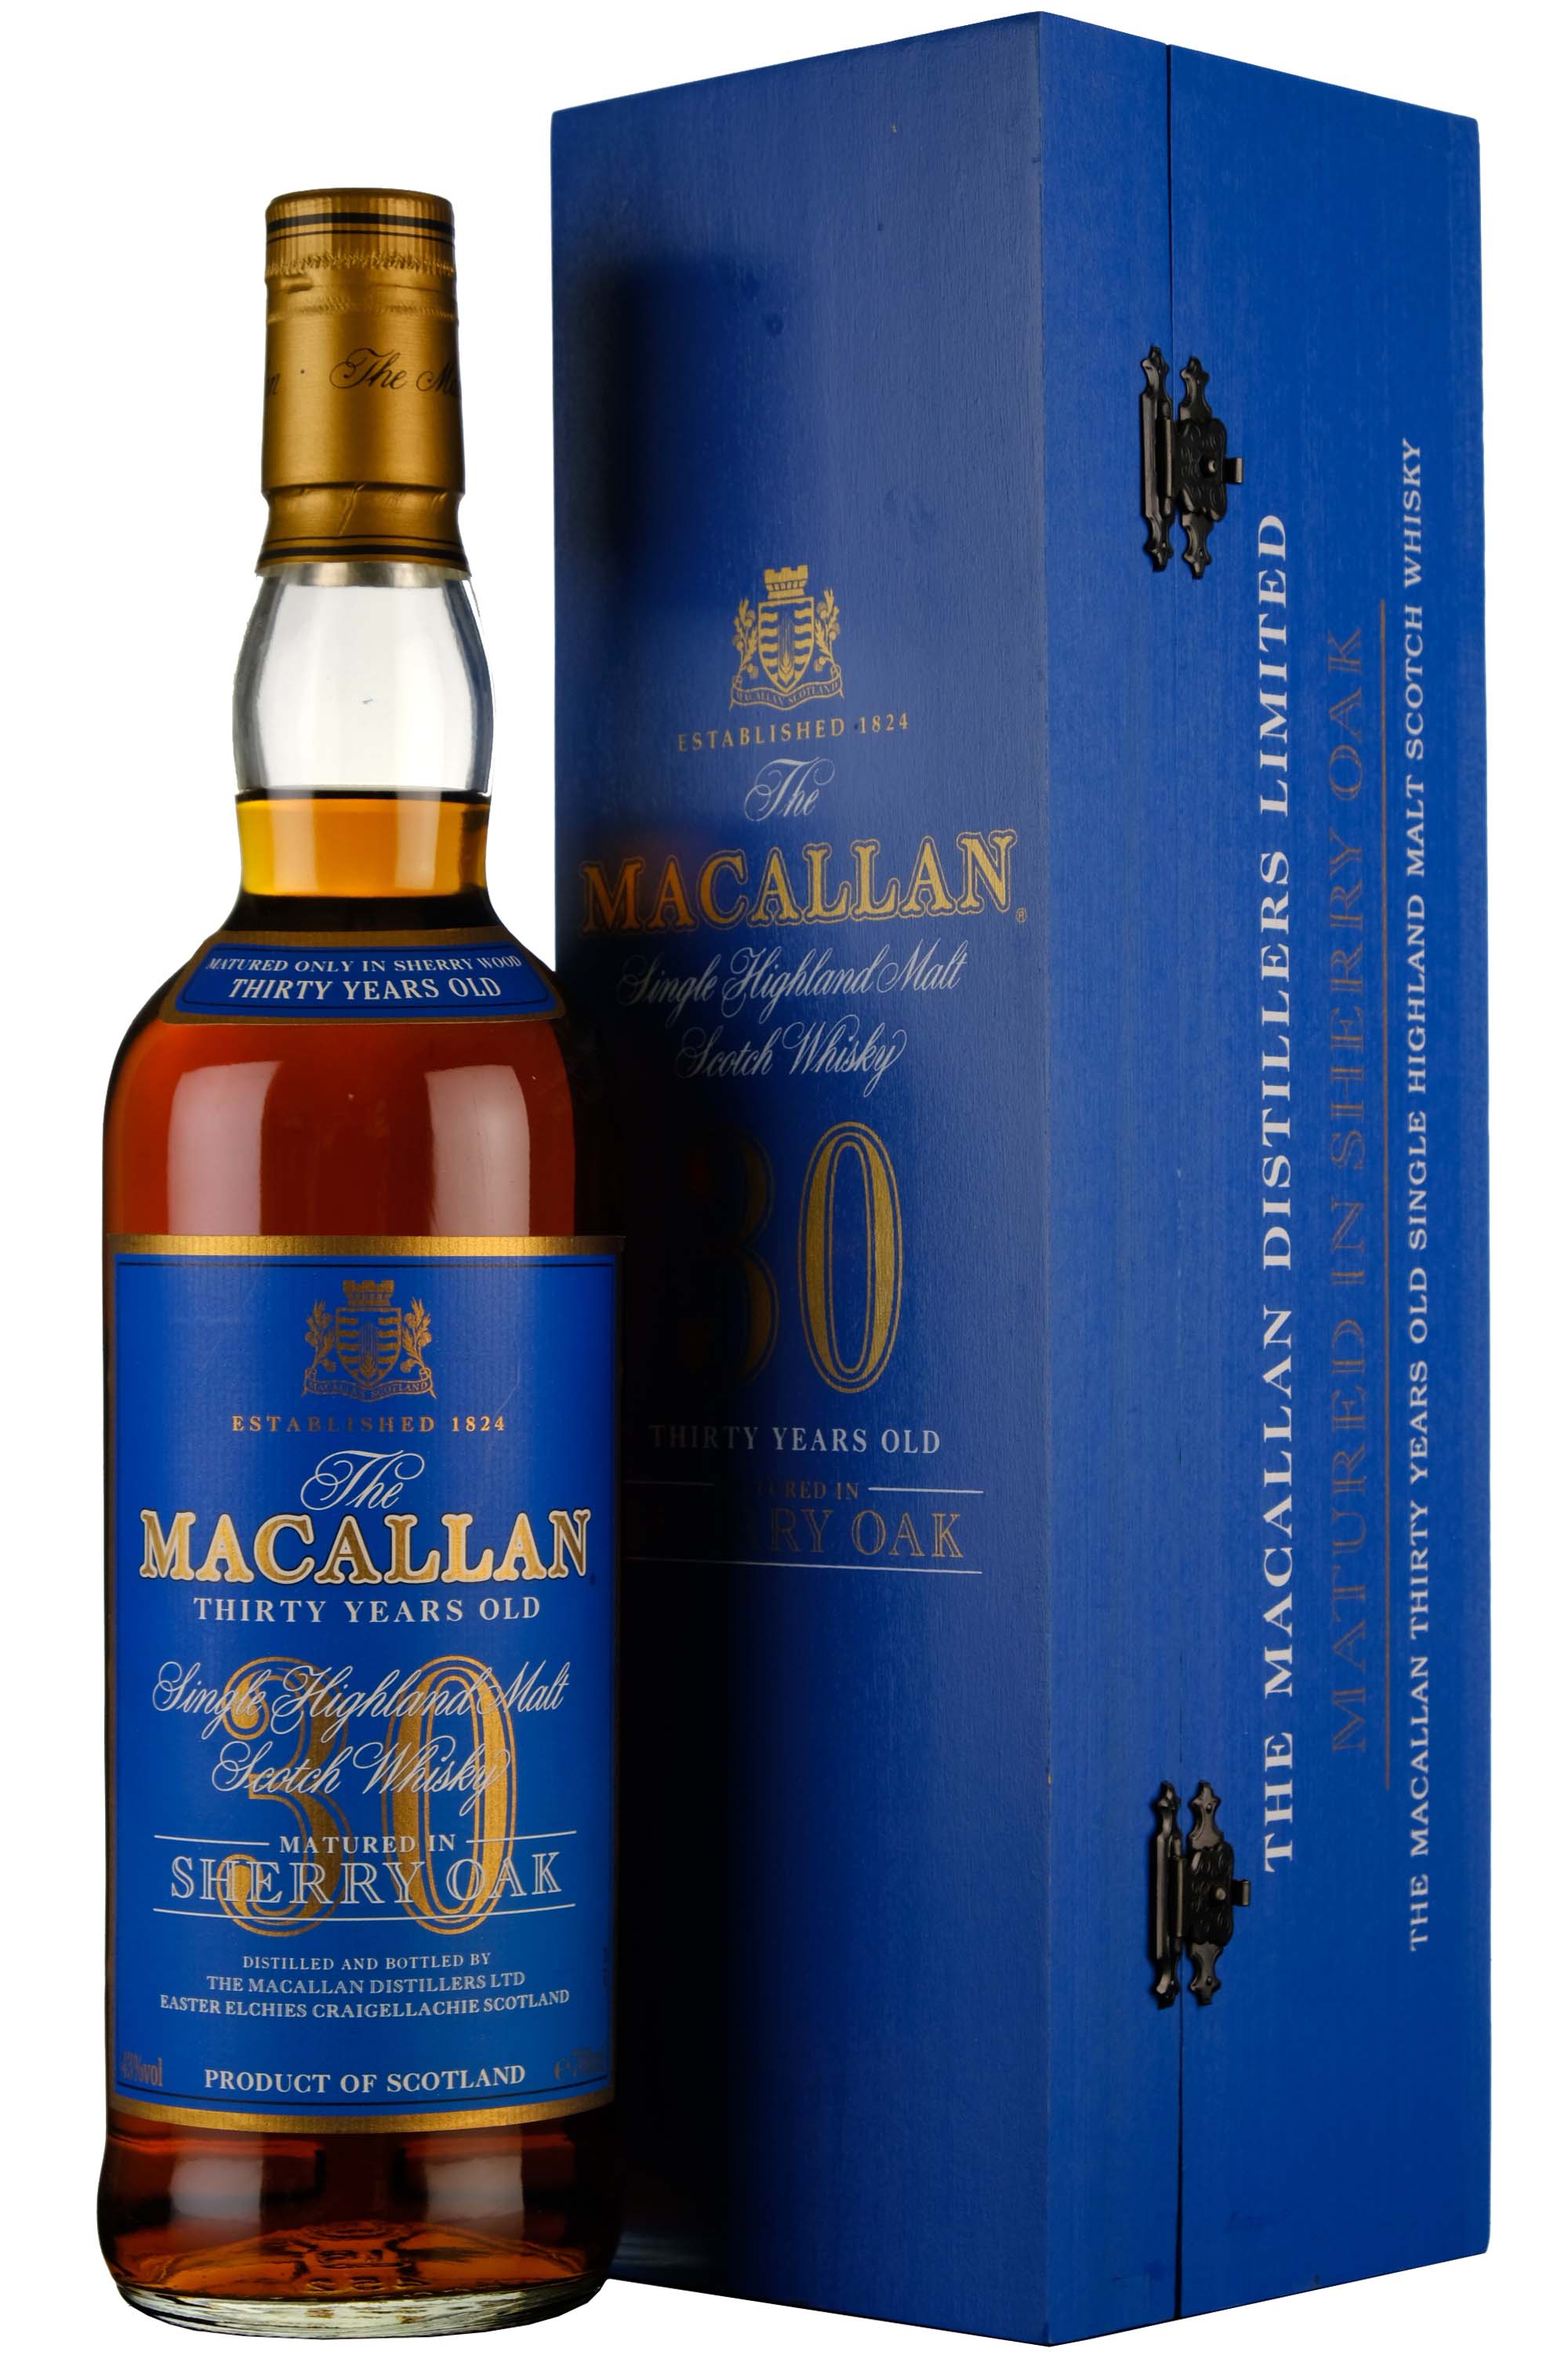 Macallan 30 Year Old Sherry Cask 1990s